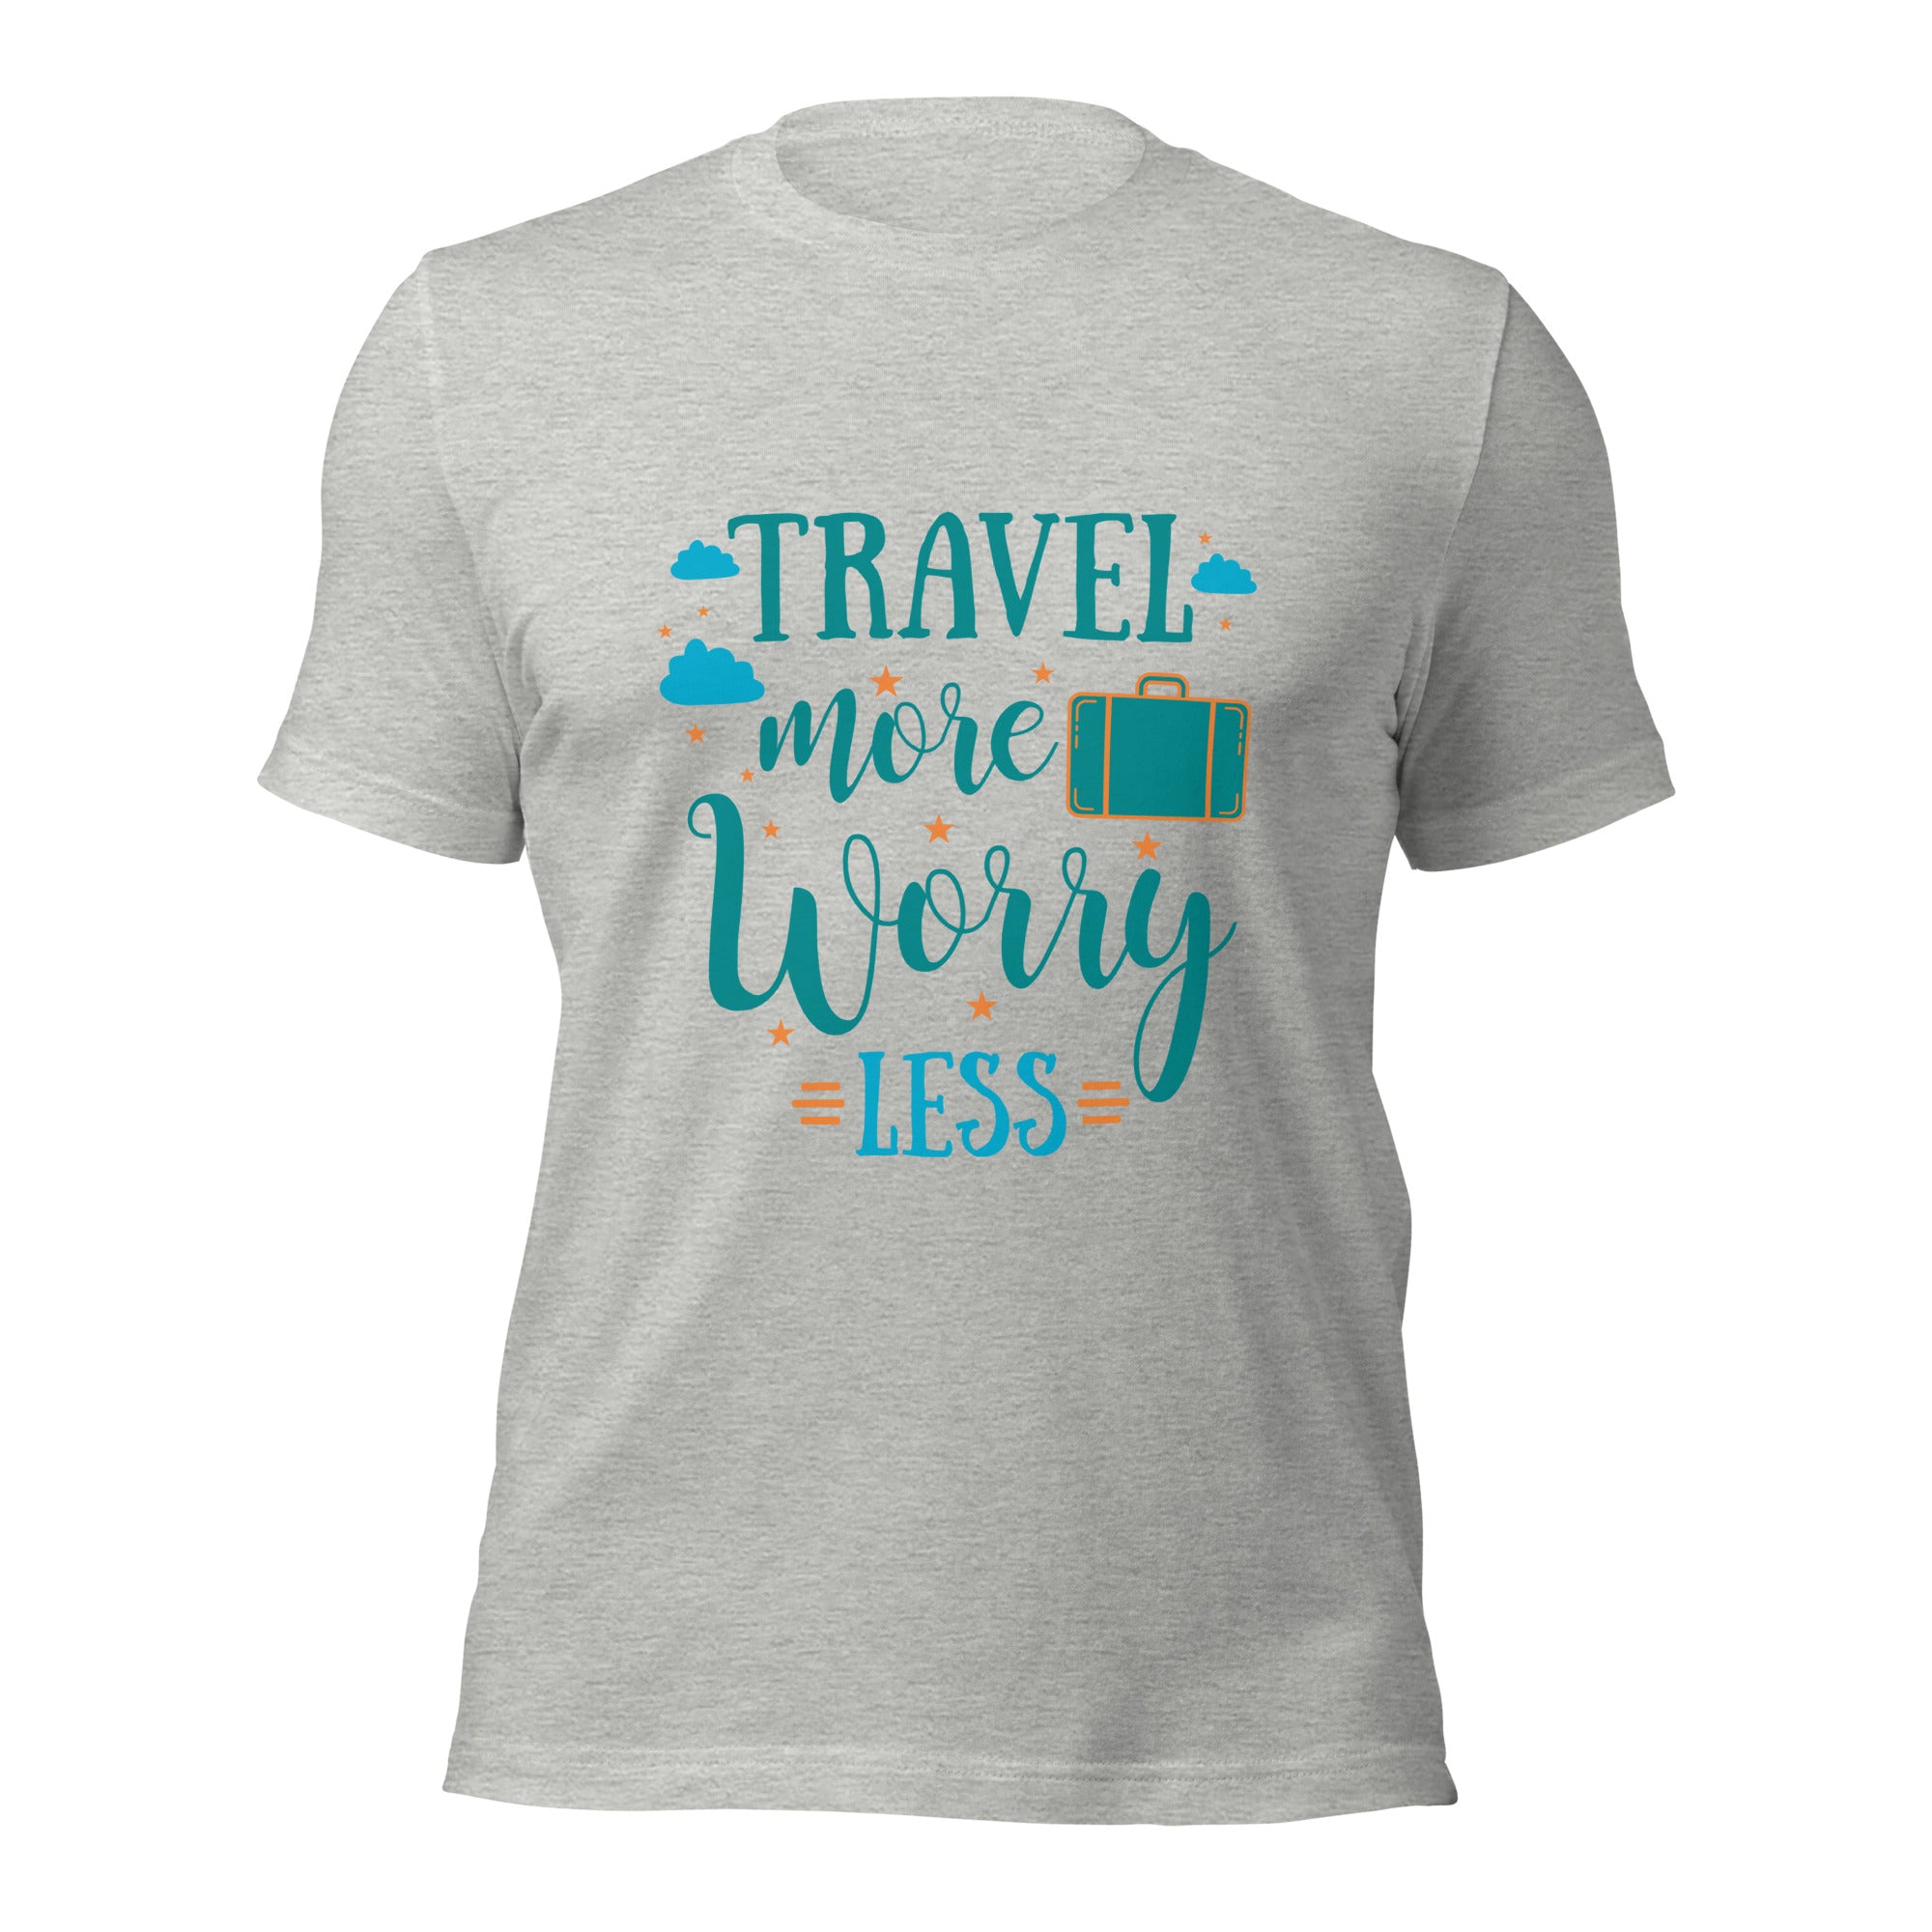 Travel More Worry Less T-Shirt